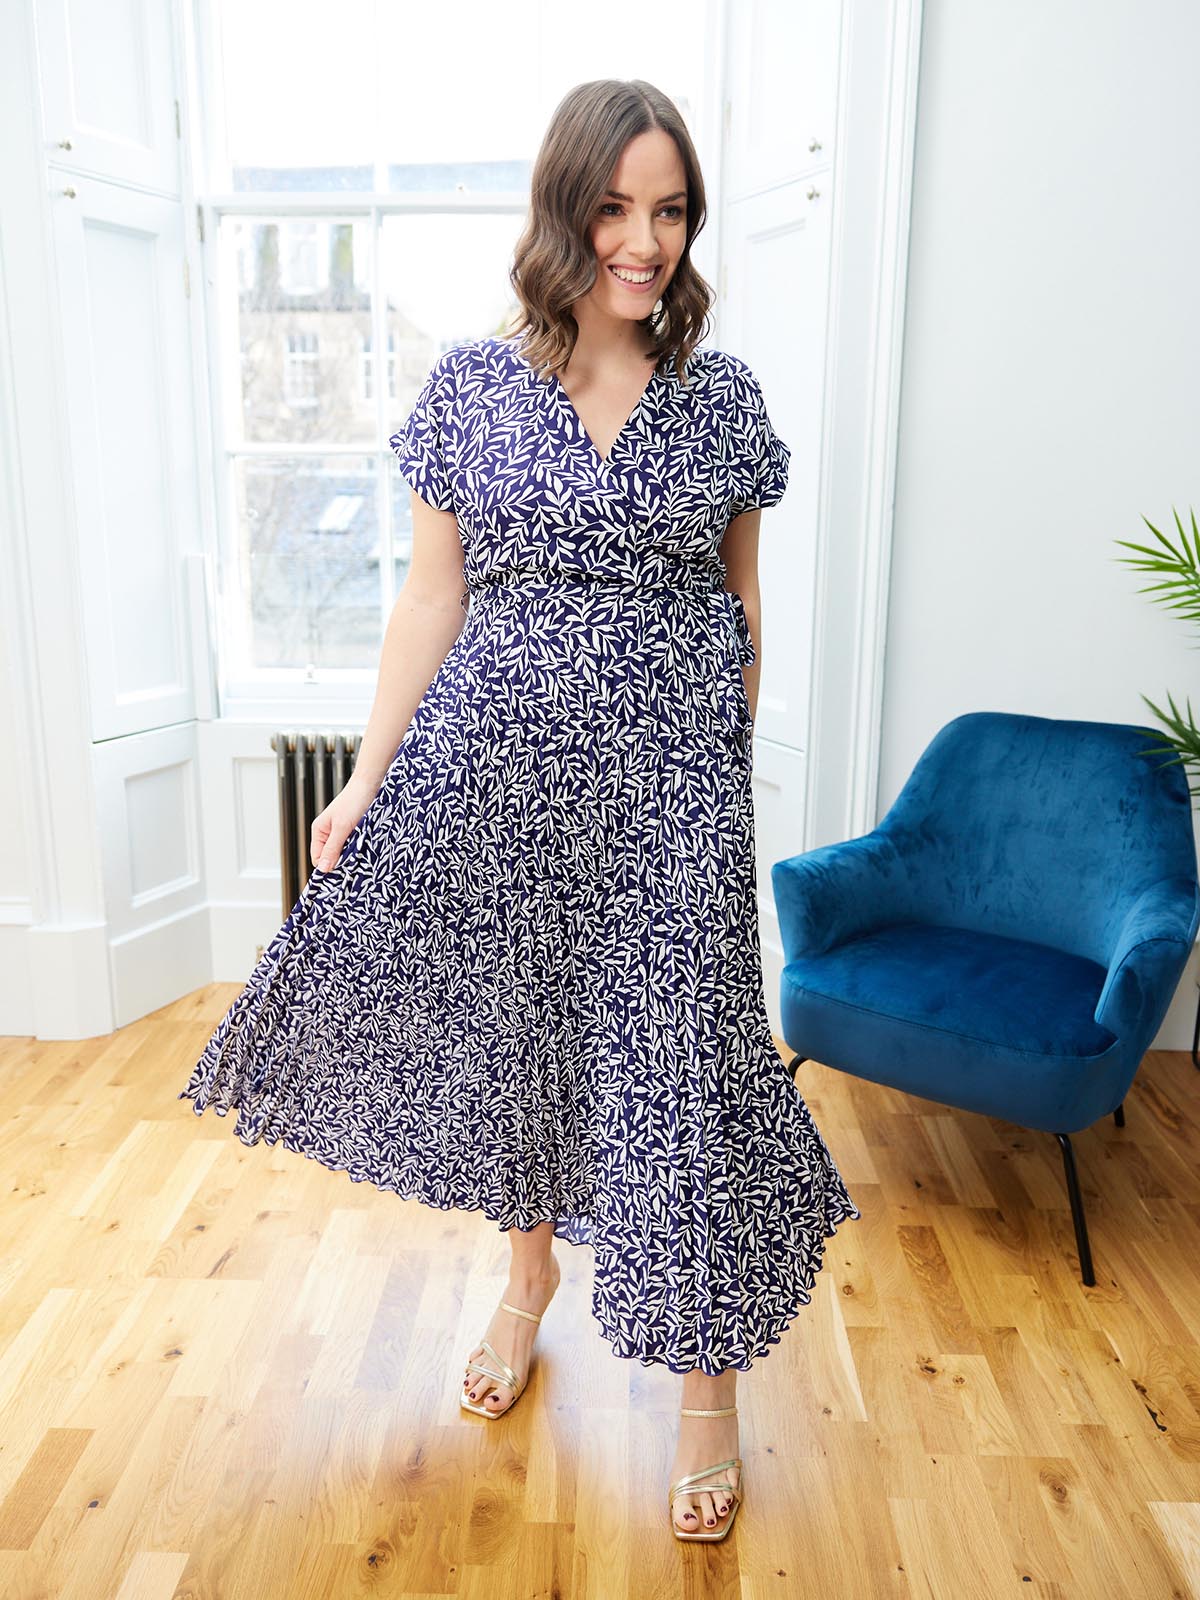 A model stands in a well lit room, wearing the sustainable Nena dress from This is Unfolded. They are holding the pleated fabric out slightly and smiling. 